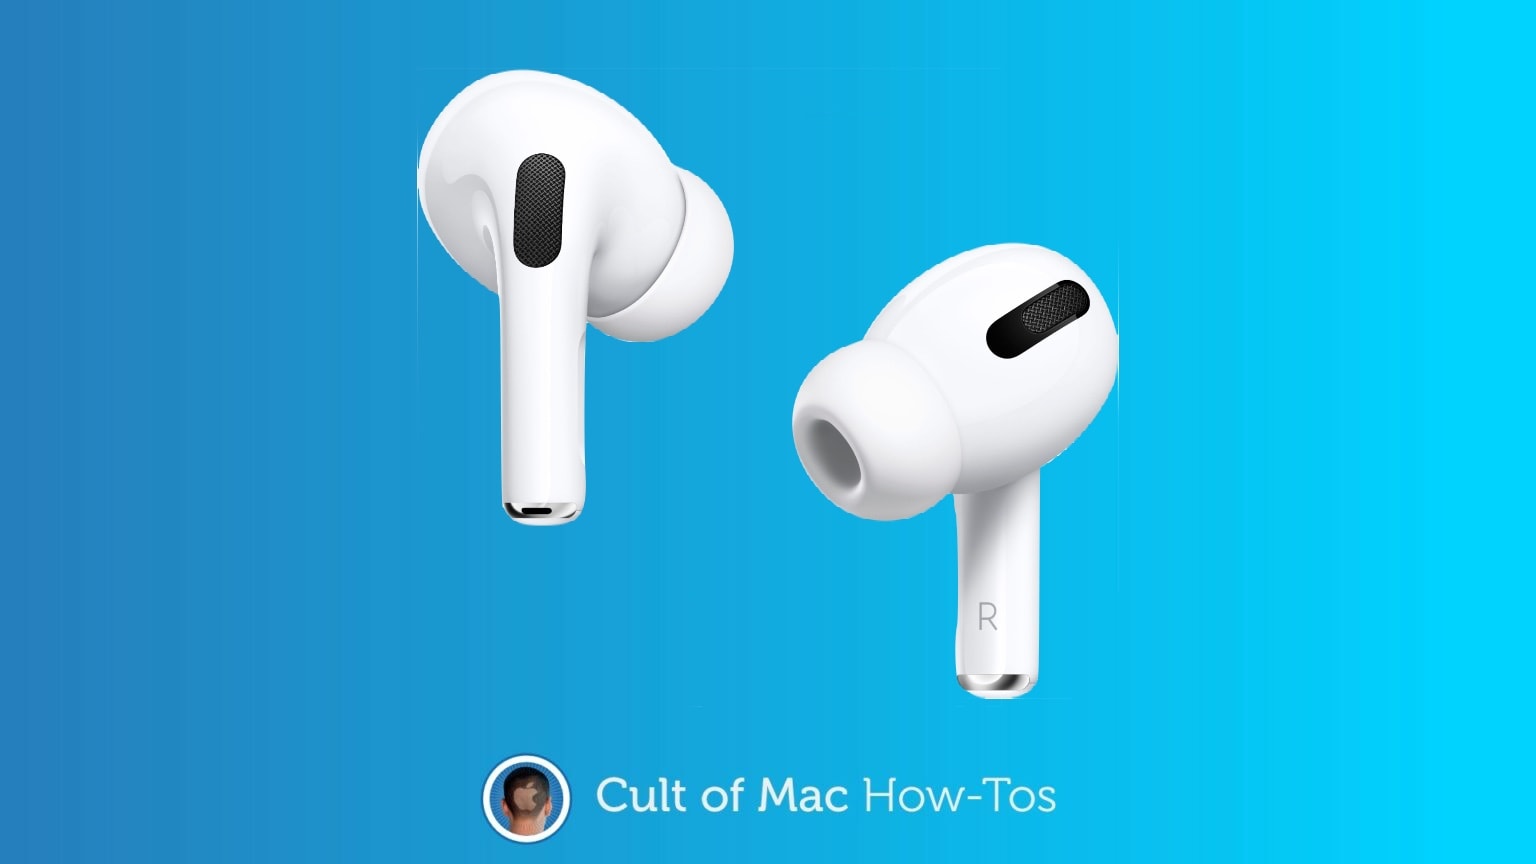 Find out how to get the most recent AirPods firmware updates